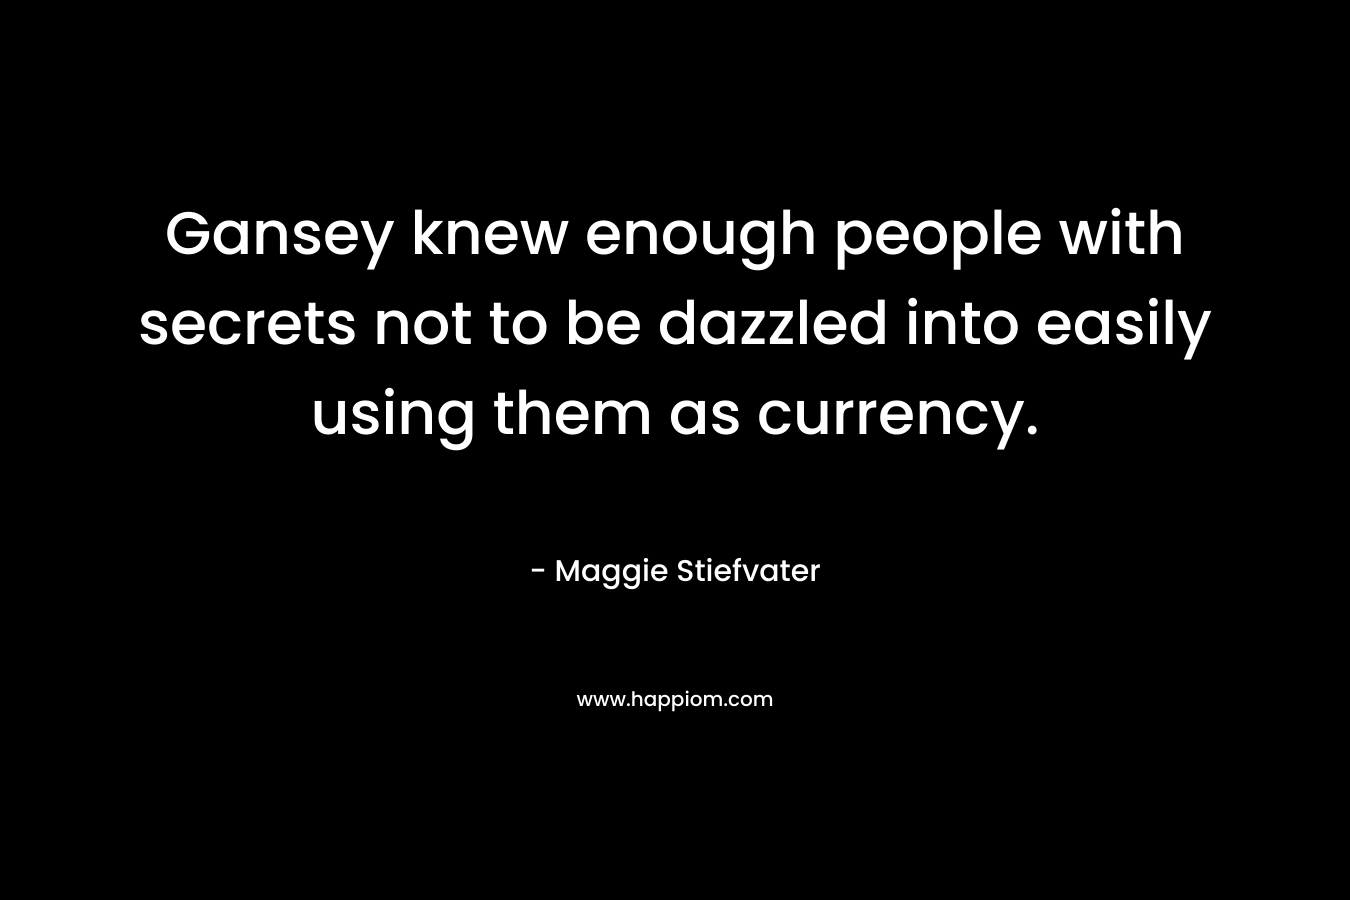 Gansey knew enough people with secrets not to be dazzled into easily using them as currency.